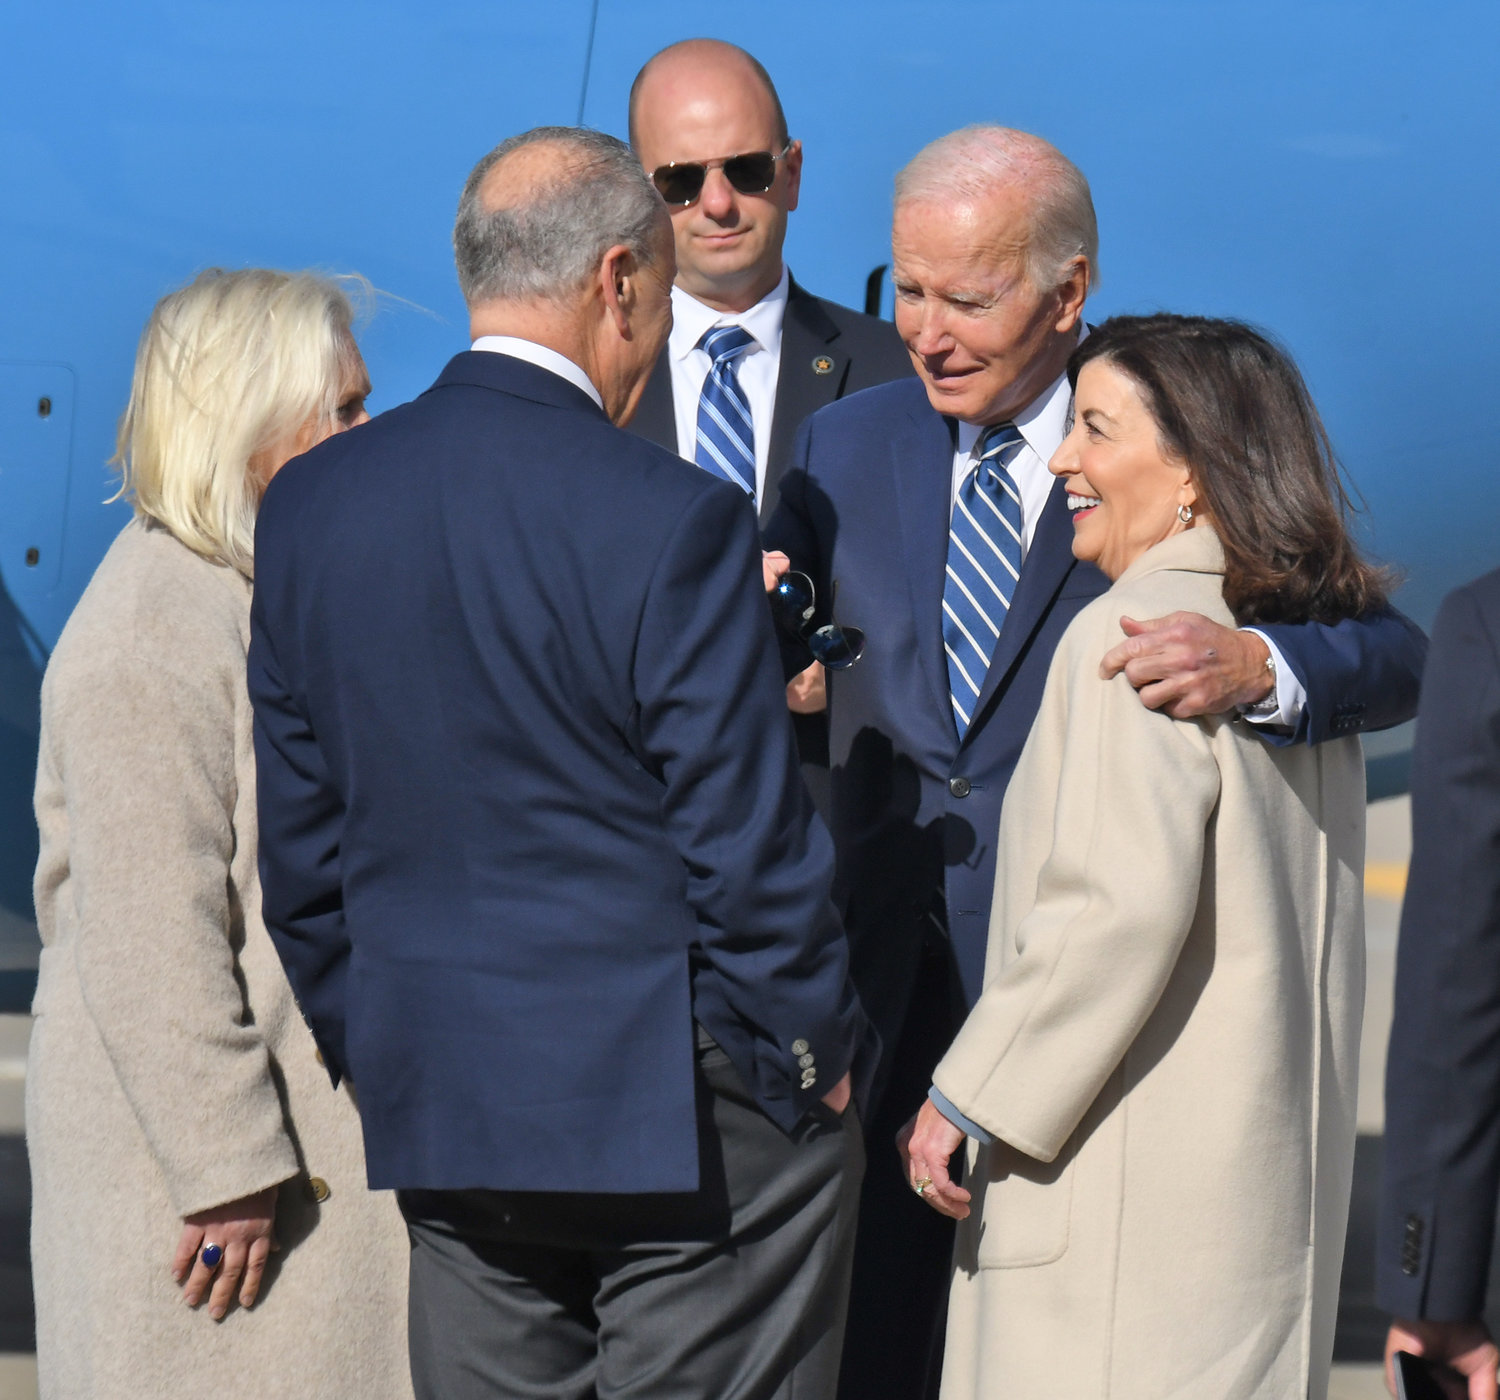 WELCOME WAGON — President Joseph Biden chats with U.S. Senators Kirsten Gillibrand and Charles E. Schumer, and Gov. Kathy Hochul at Syracuse’s Hancock International Airport during his visit visit to Syracuse on Thursday, Oct. 27. Biden was to spend about four hours in Syracuse, speaking at Onondaga Community College about Micron Technology’s plans to invest up to $100 billion in a computer chip fabrication complex in Clay, a Syracuse suburb.